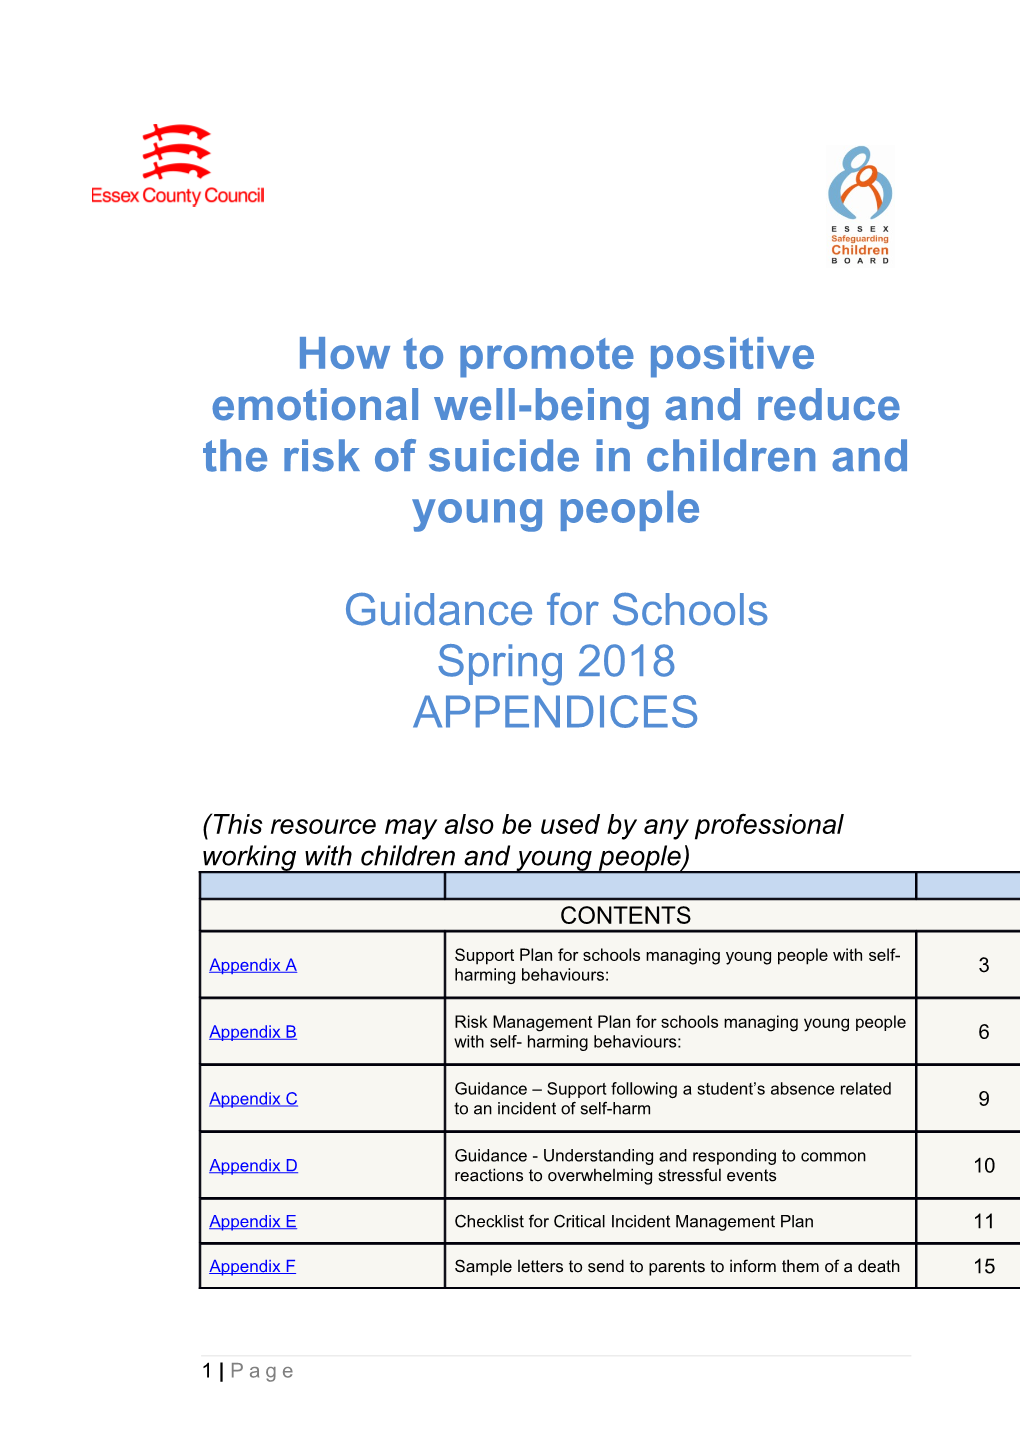 How to Promote Positive Emotional Well-Being and Reduce the Risk of Suicide in Children